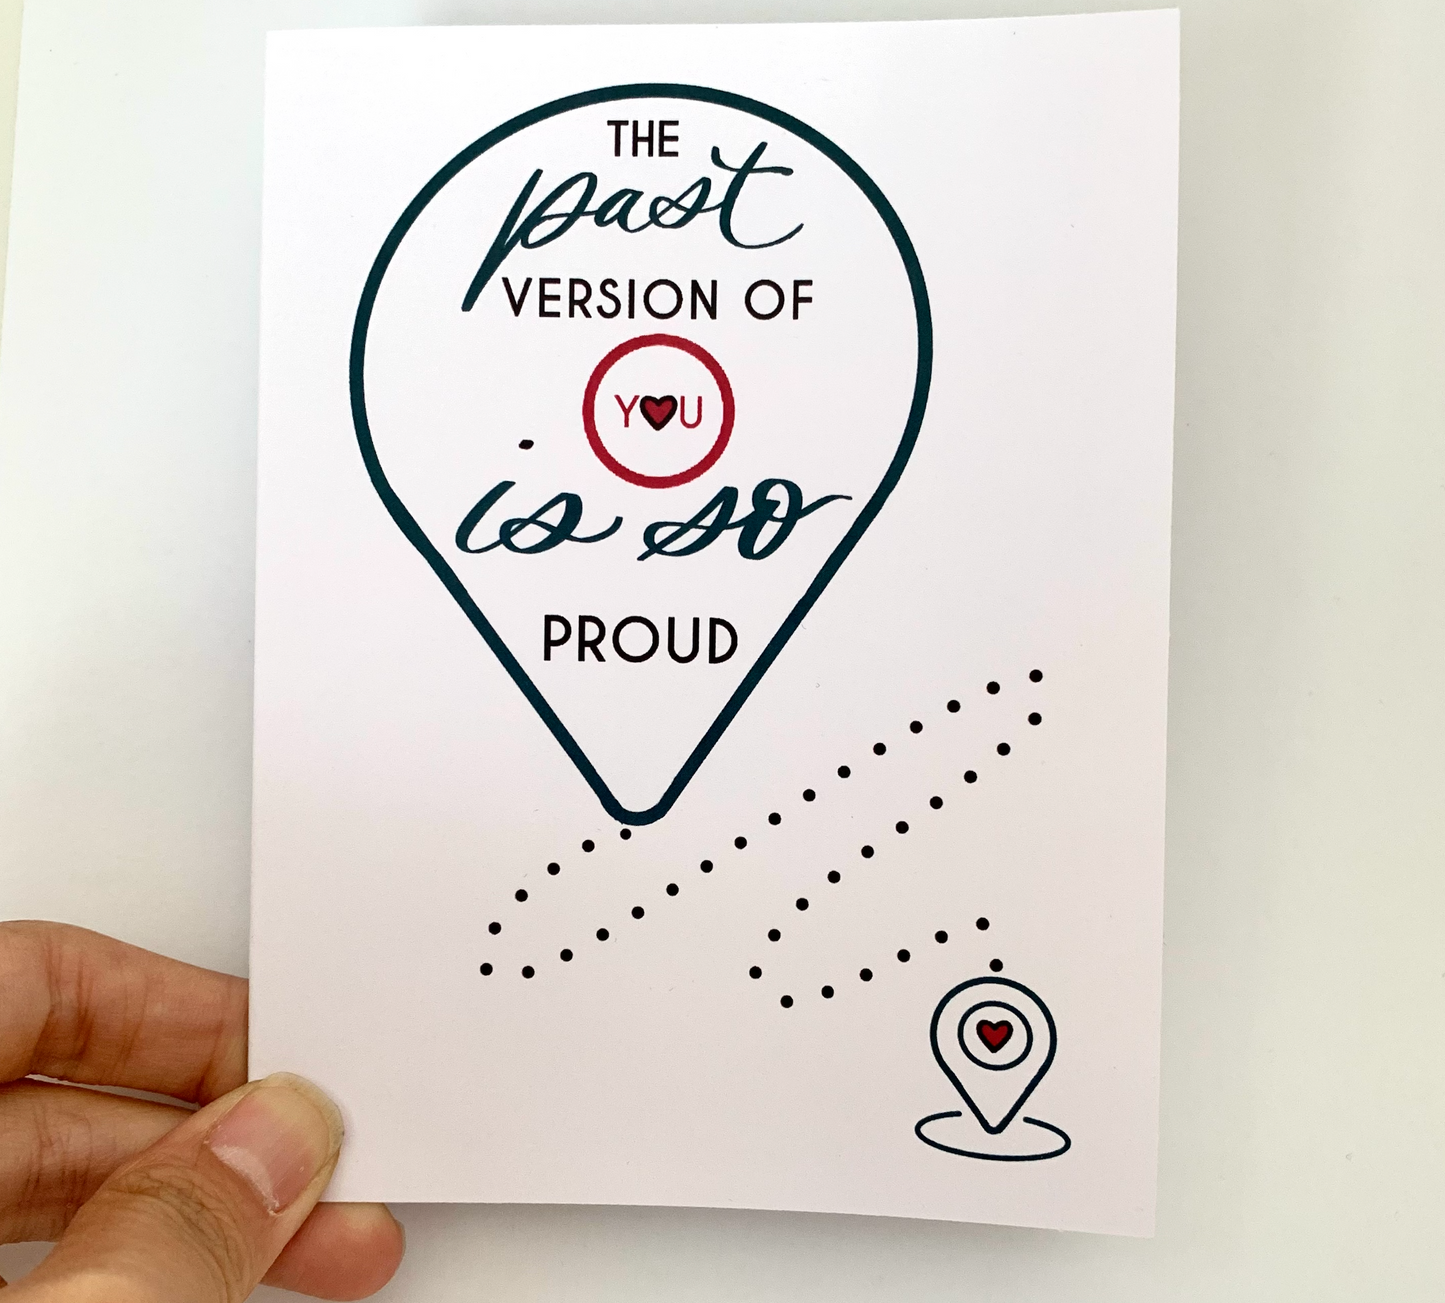 The past version of you is so proud card, self improvement card, motivation card